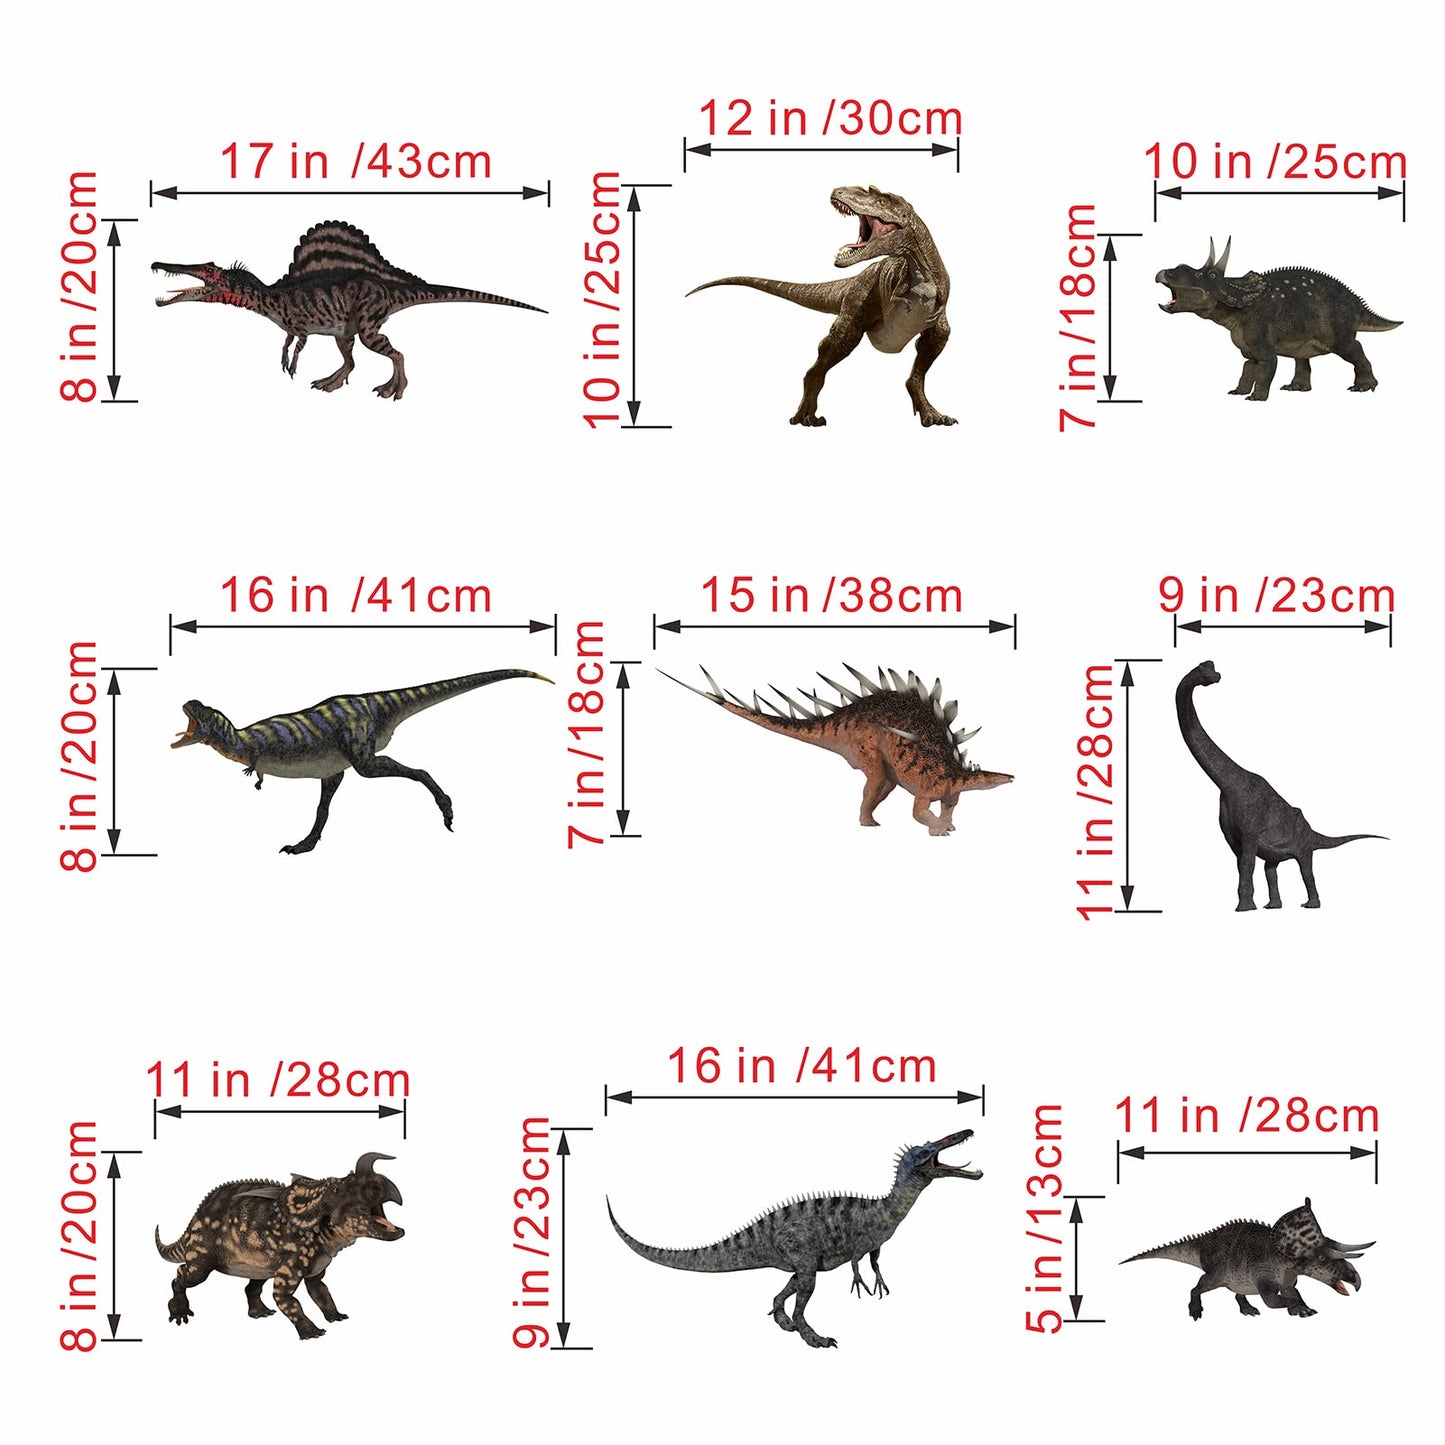 AnFigure Dinosaur Wall Decals for Boys Bedroom Baby Room Kids Room Wall Stickers 3D DIY Dino World Animals Wall Decal Nursery Playroom Living Room Background Removable Wall Decor